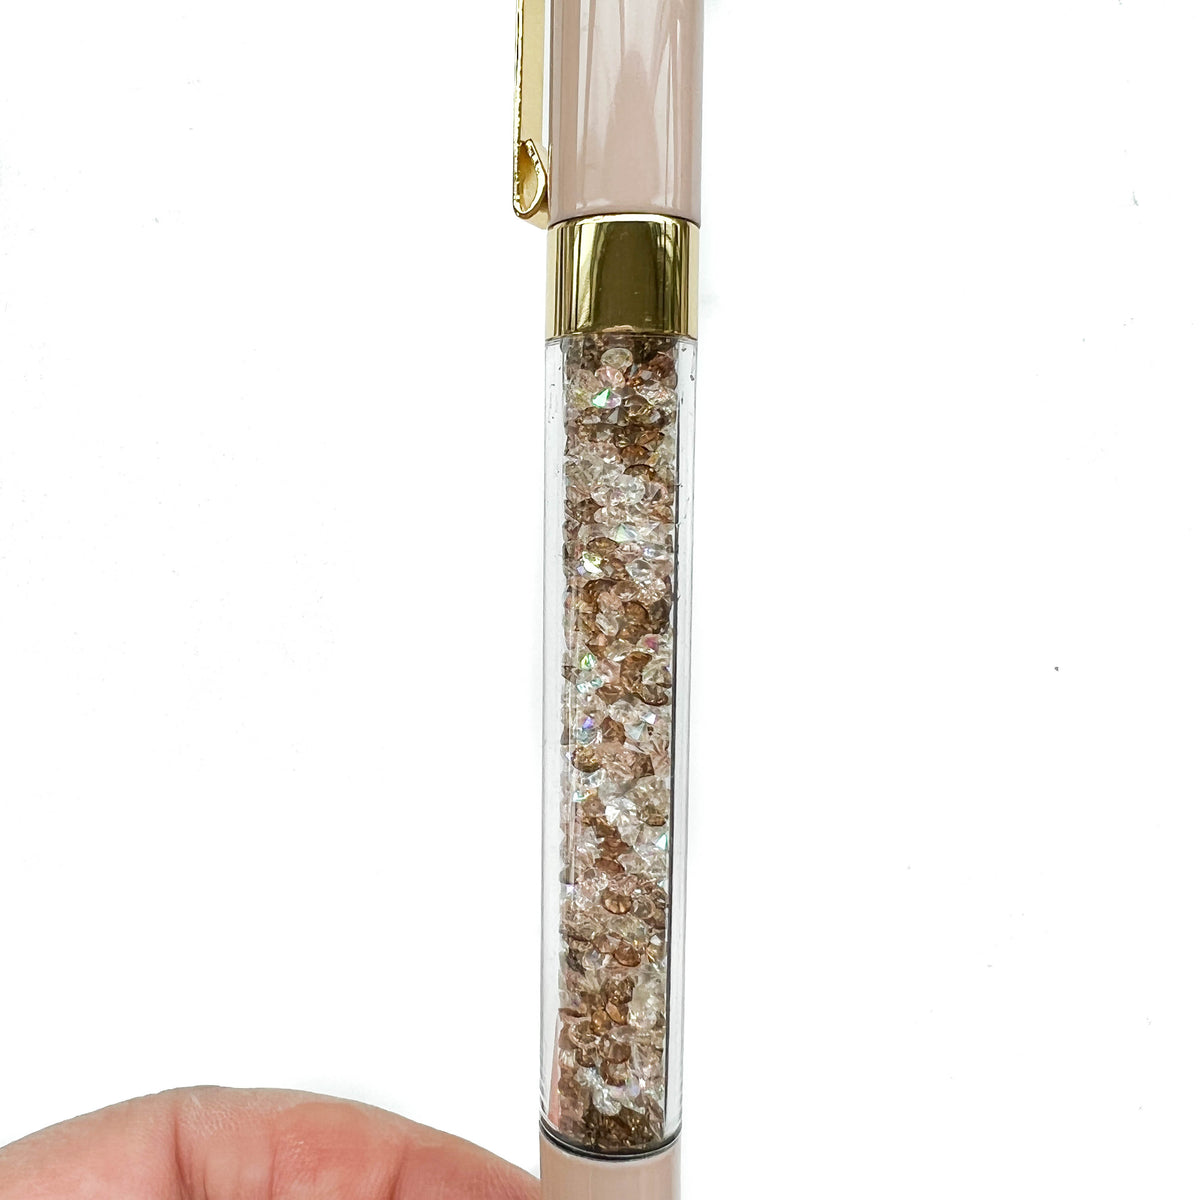 Neutral Nude Crystal VBPen | limited pen